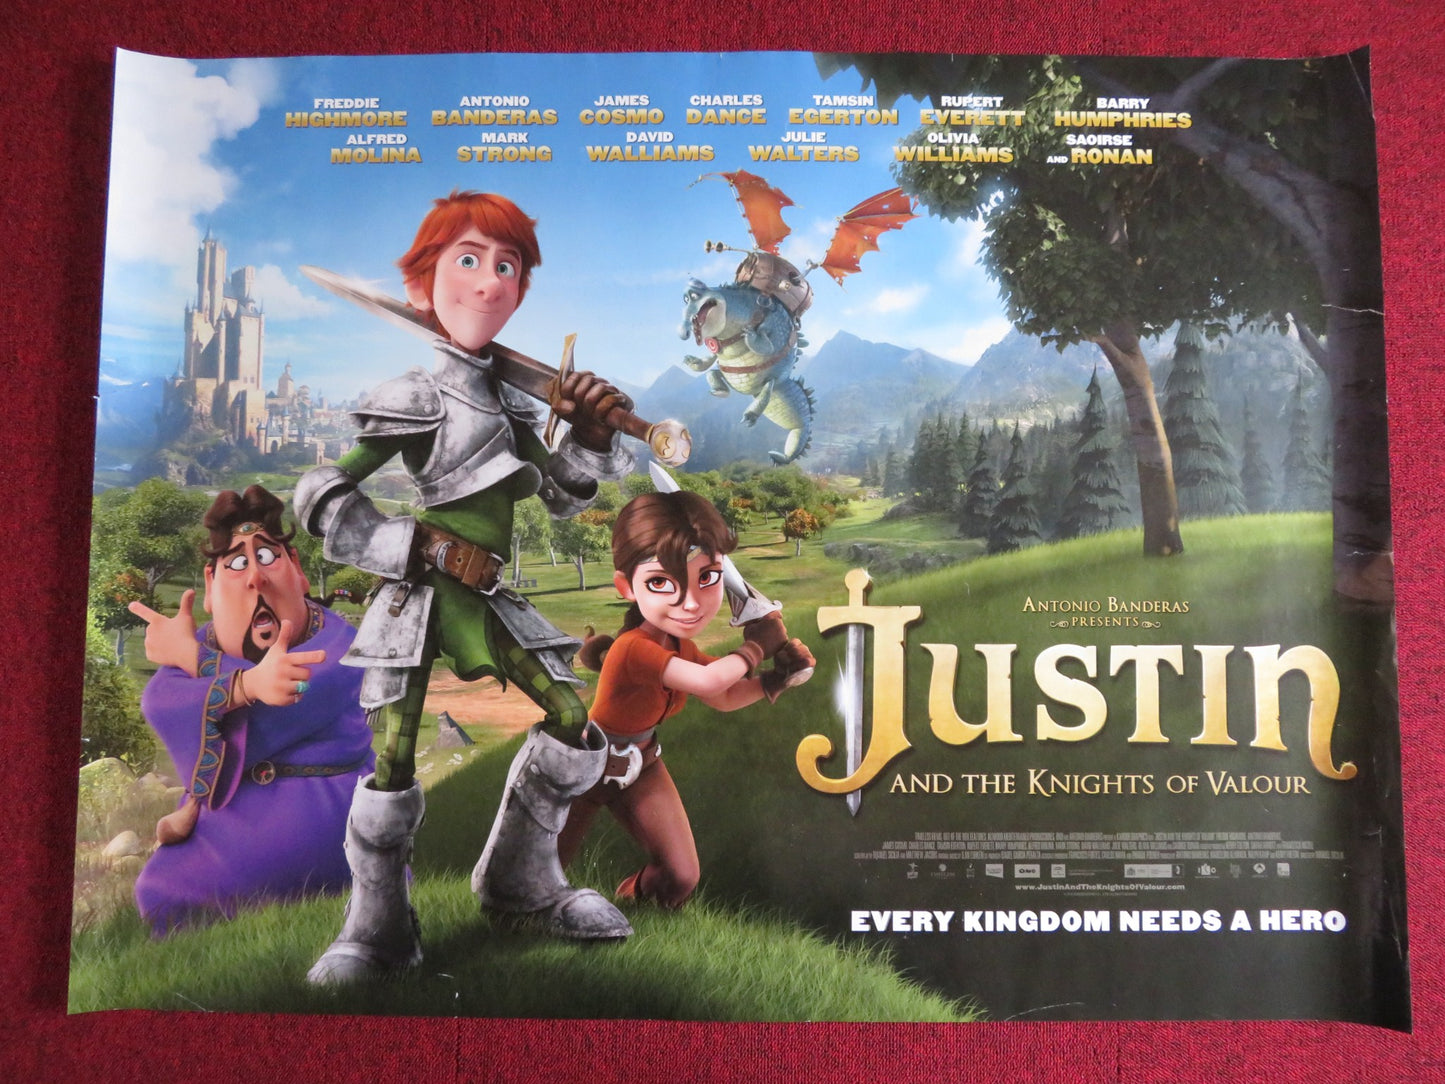 JUSTIN AND THE KNIGHTS OF VALOUR UK QUAD (30"x 40") ROLLED POSTER BANDERAS 2013